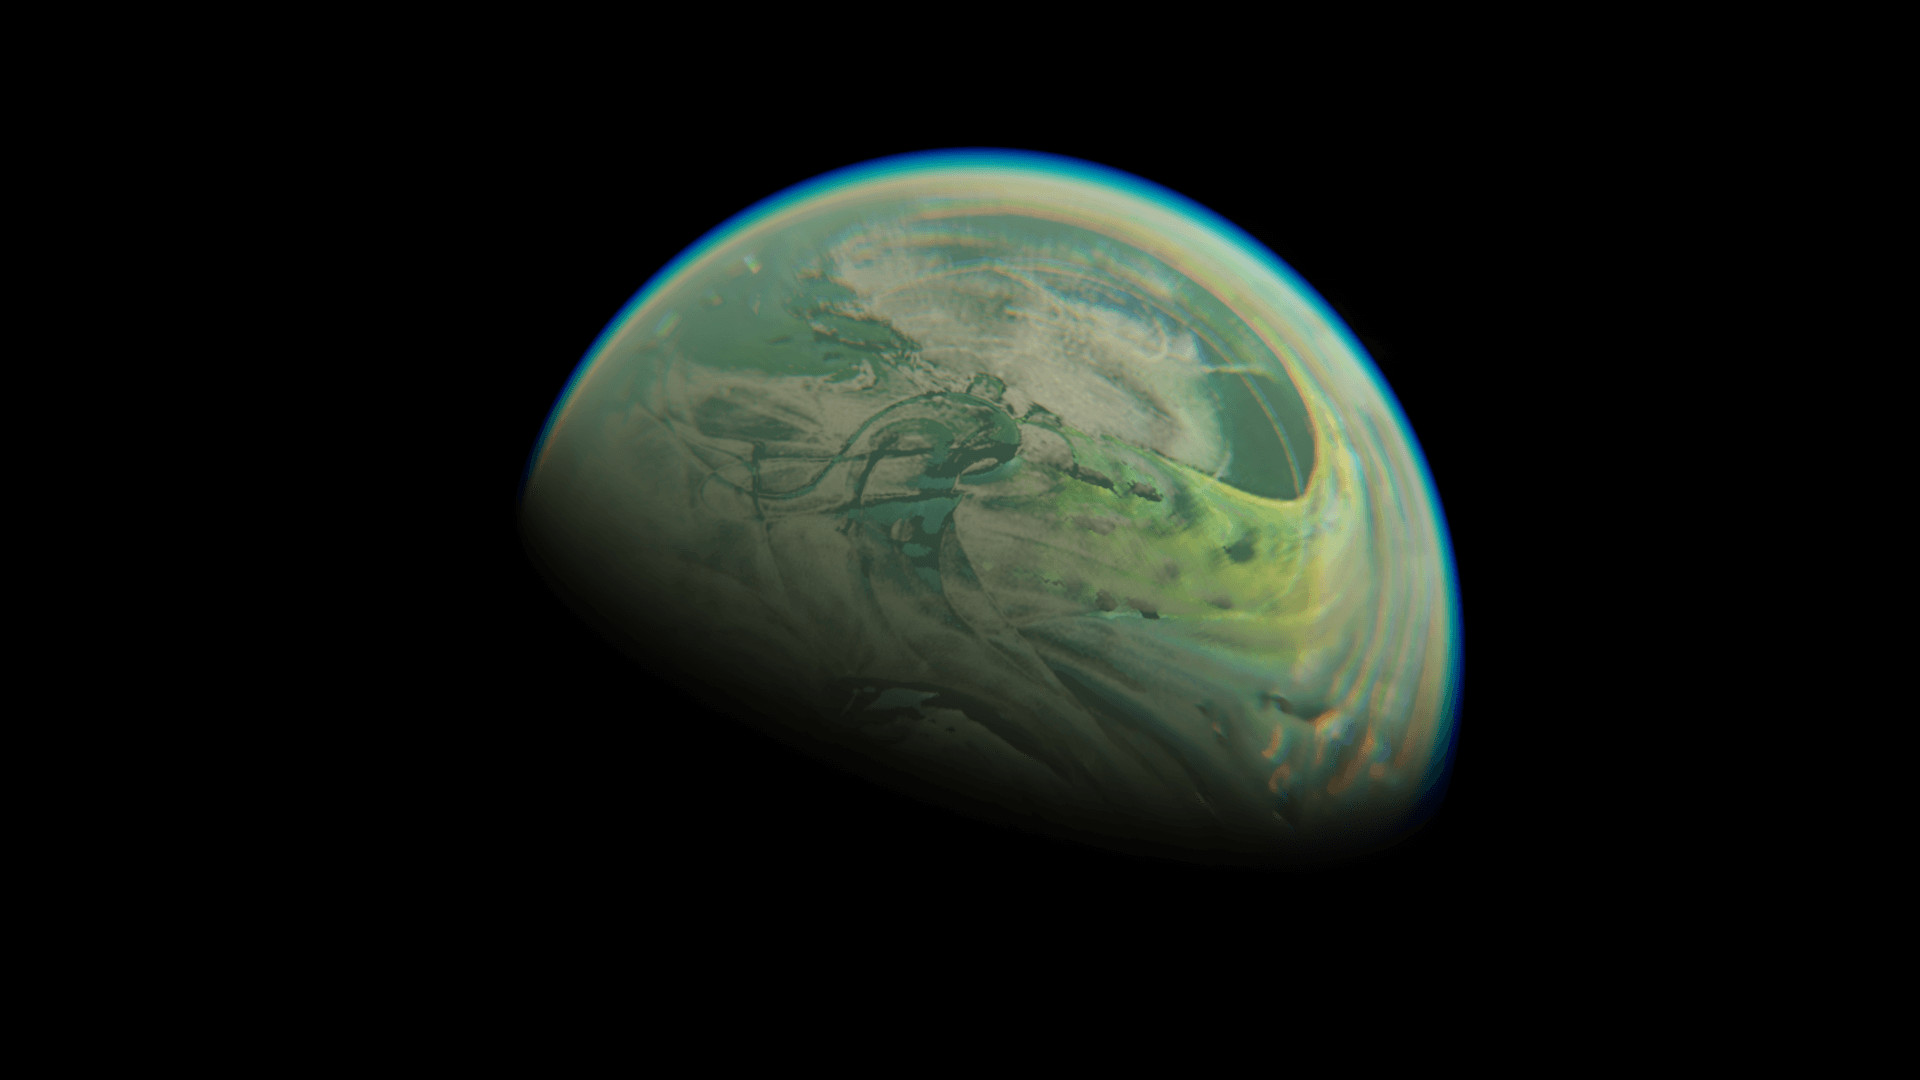 Unconfirmed World A is blue and green with grey clouds.